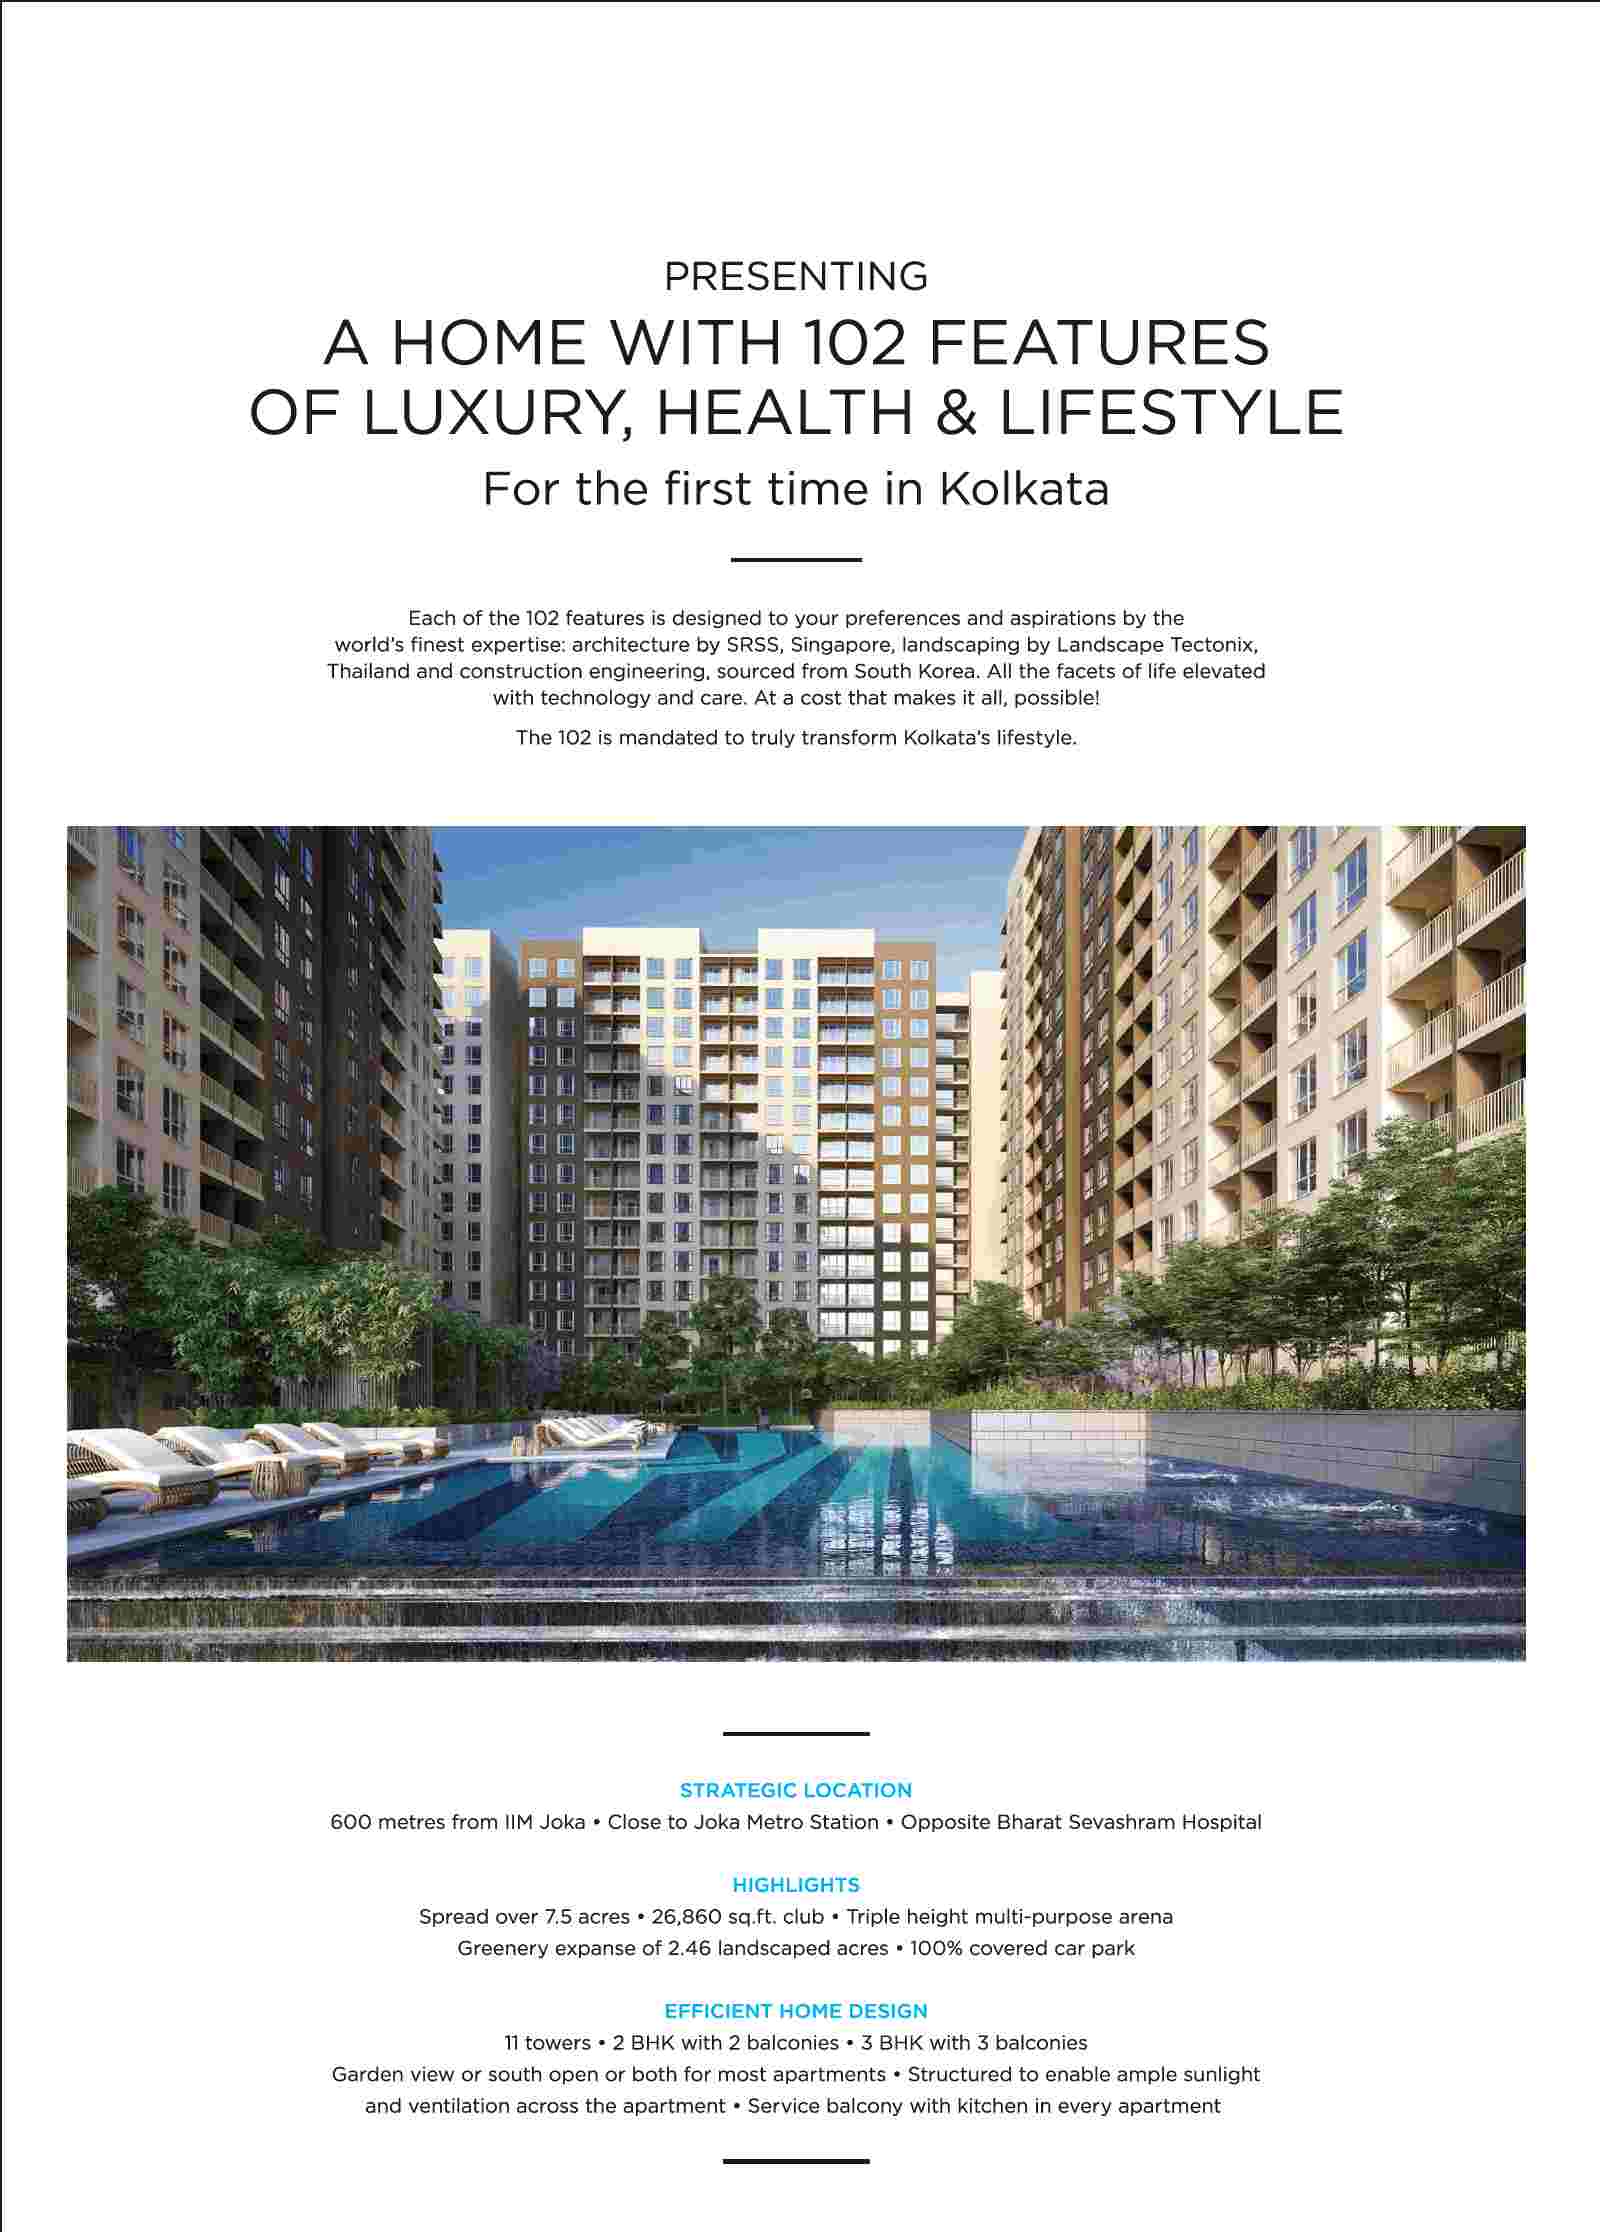 Book a home with 102 features of luxury, health & lifestyle at PS Vinayak The 102 in Kolkata